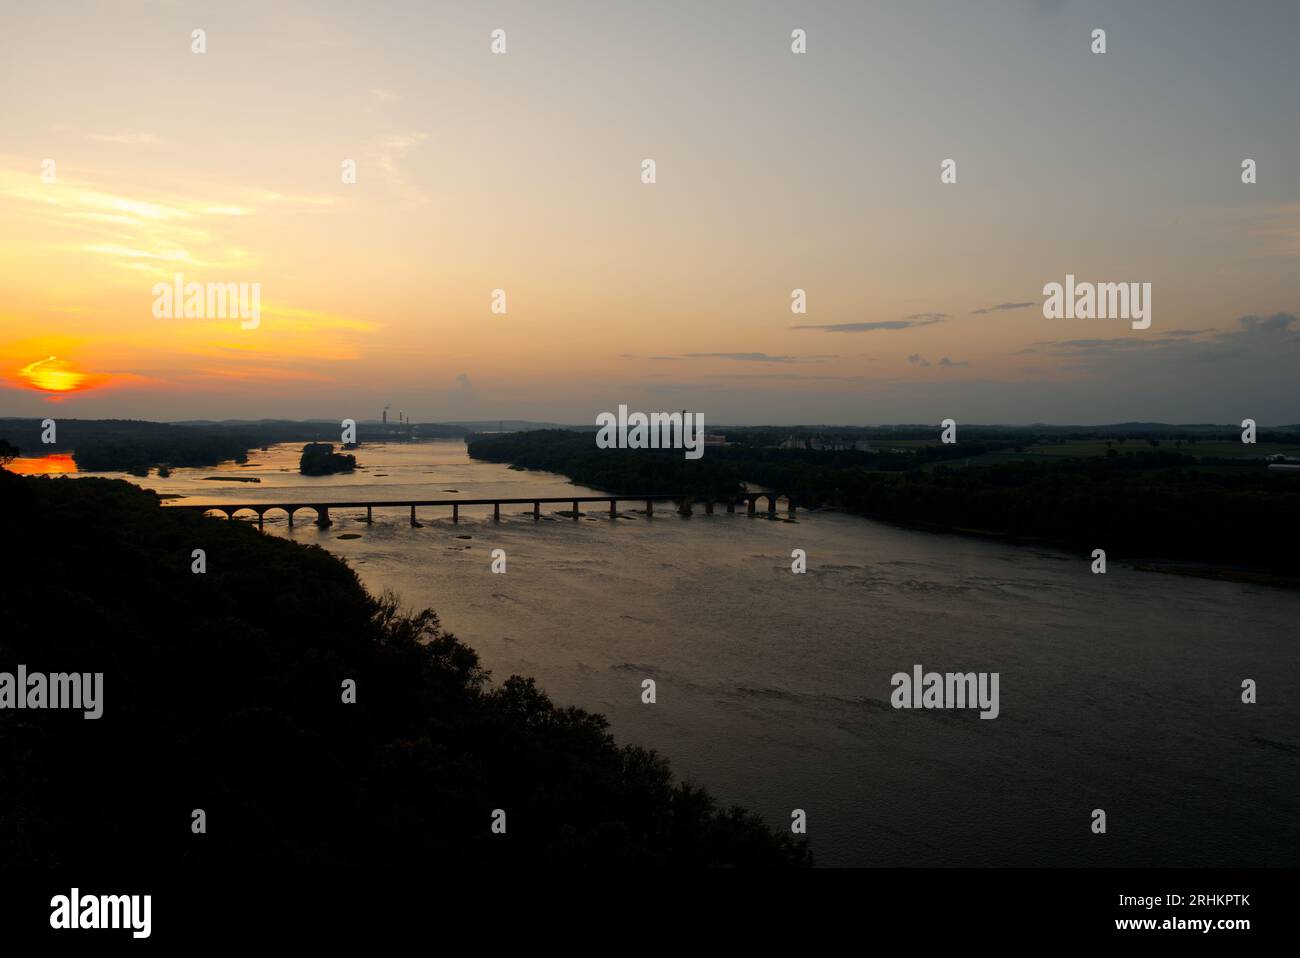 Susquehanna River at sunset from Schull's Rock in Pennsylvania Stock Photo